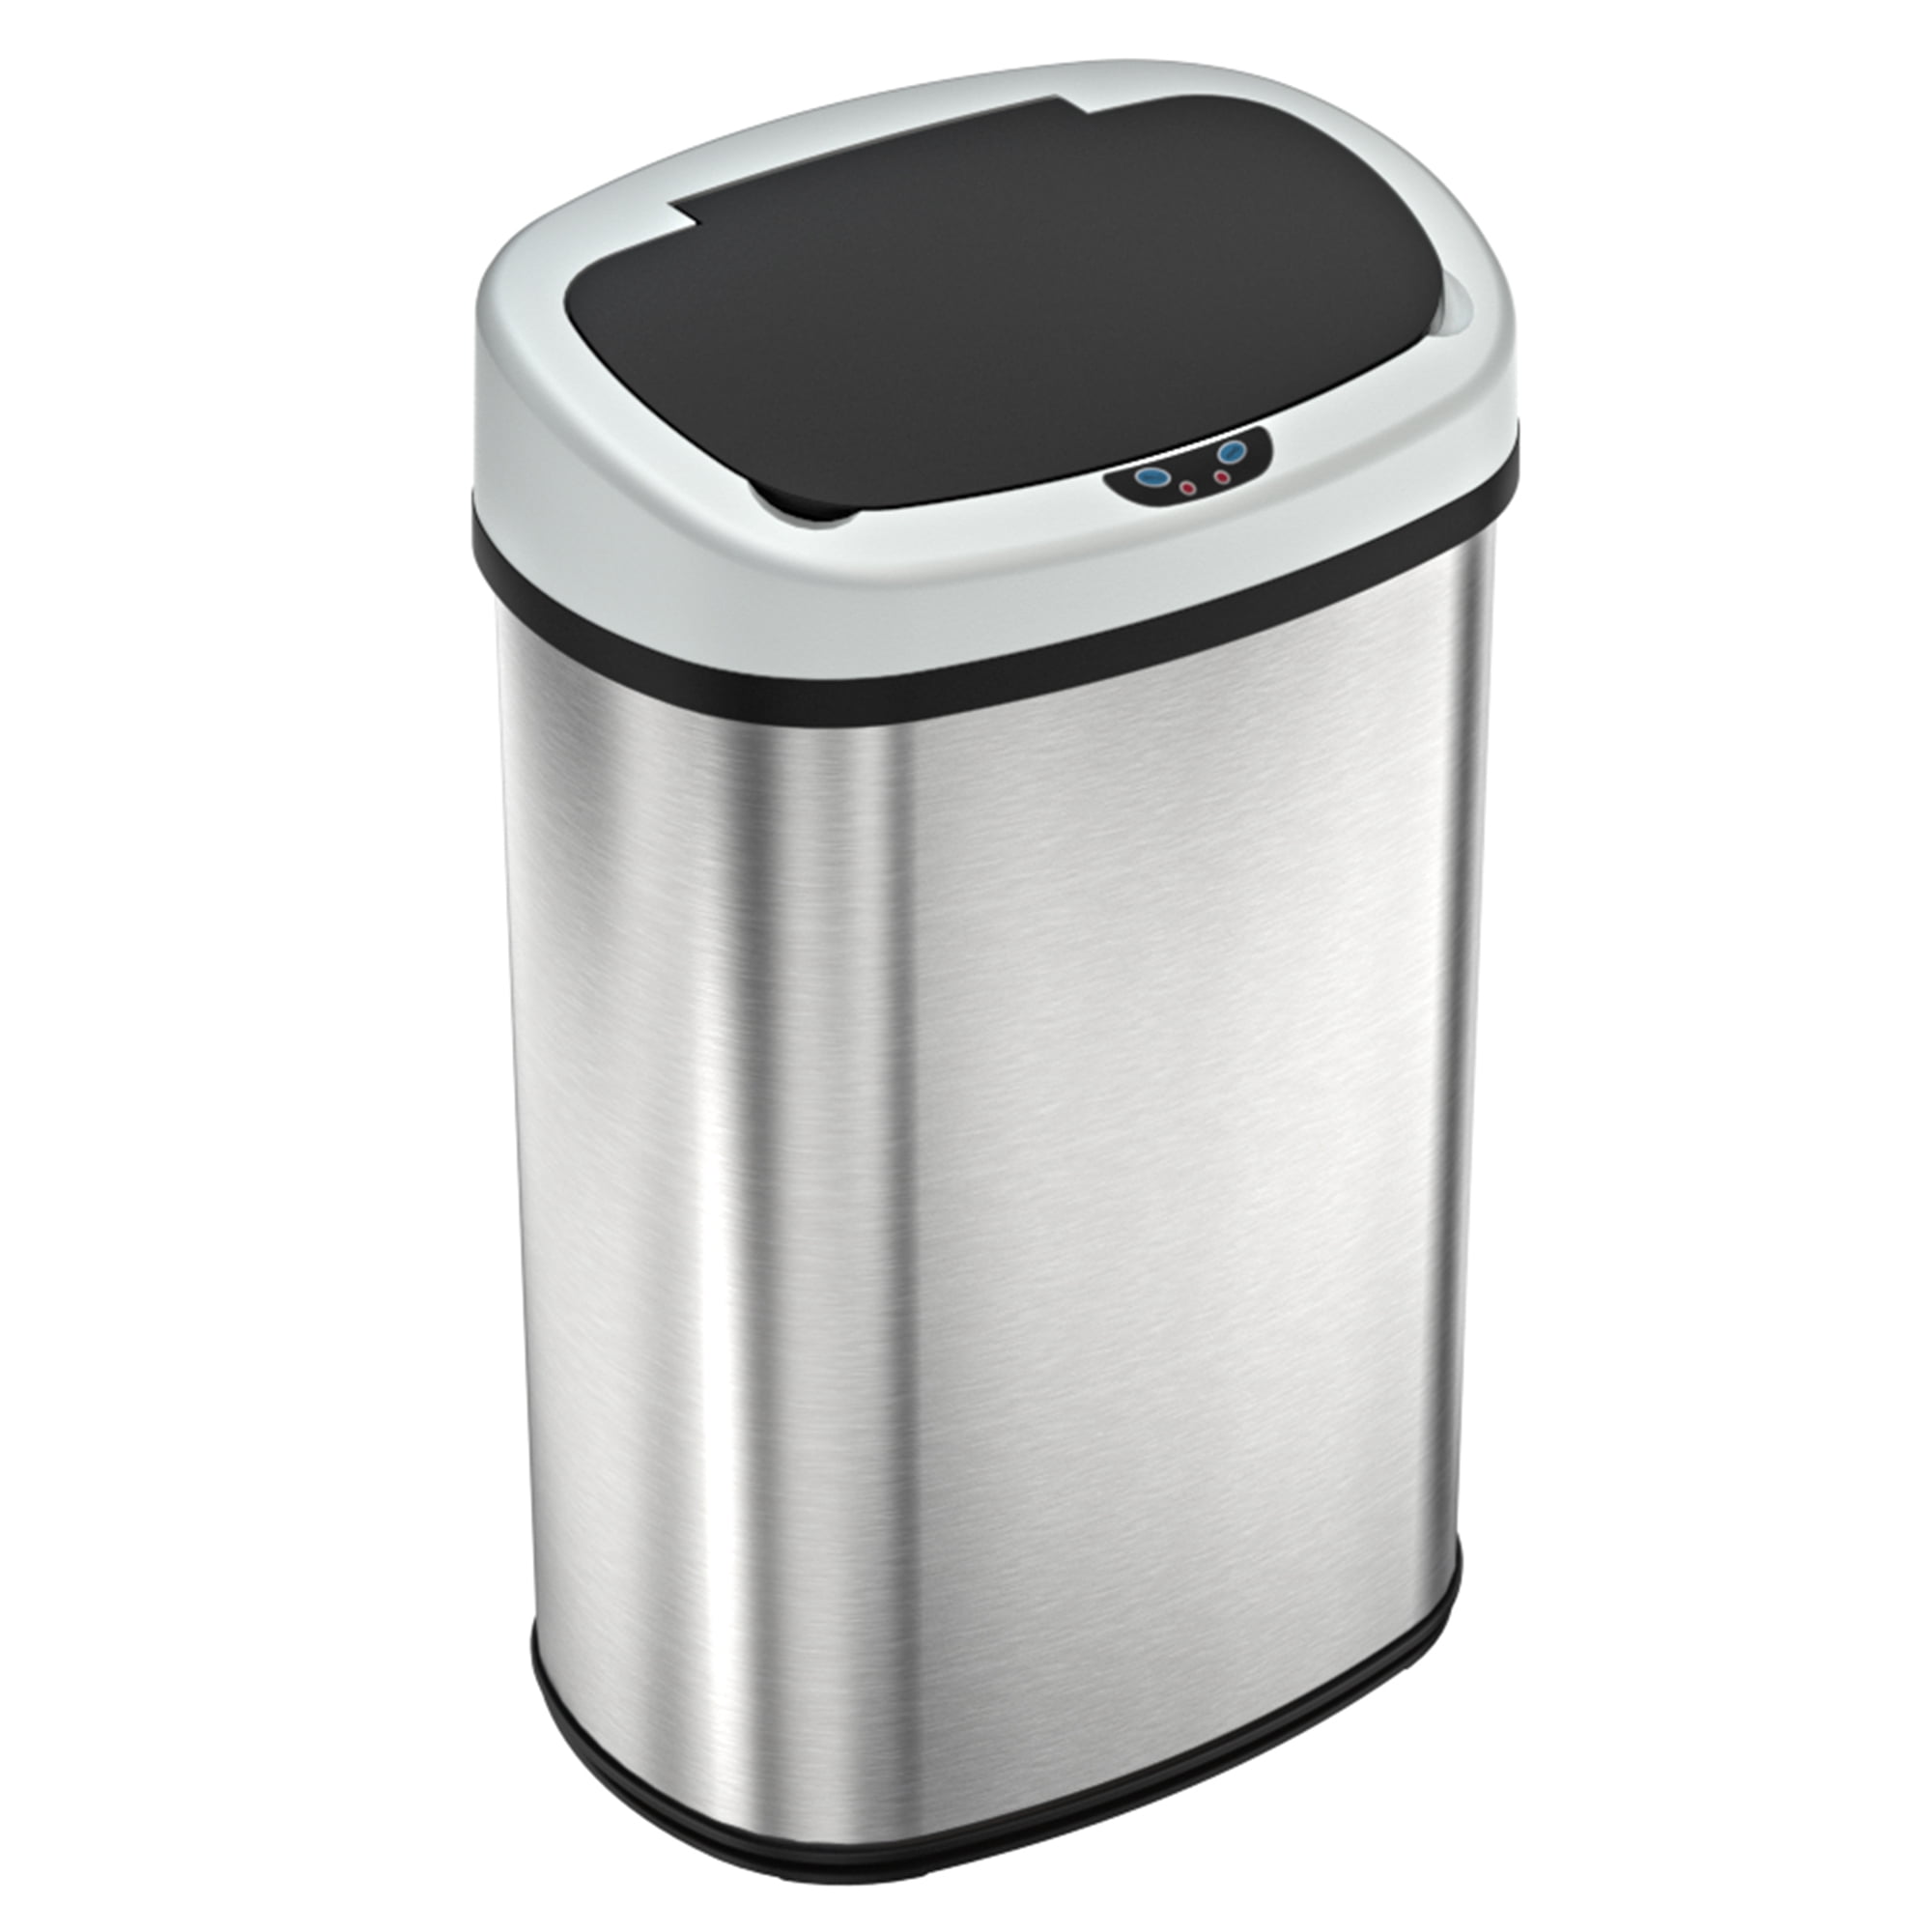 Details about   Motion Activated Trash Can Garbage Bin Wastebasket Stainless Steel 2 Pieces NEW 